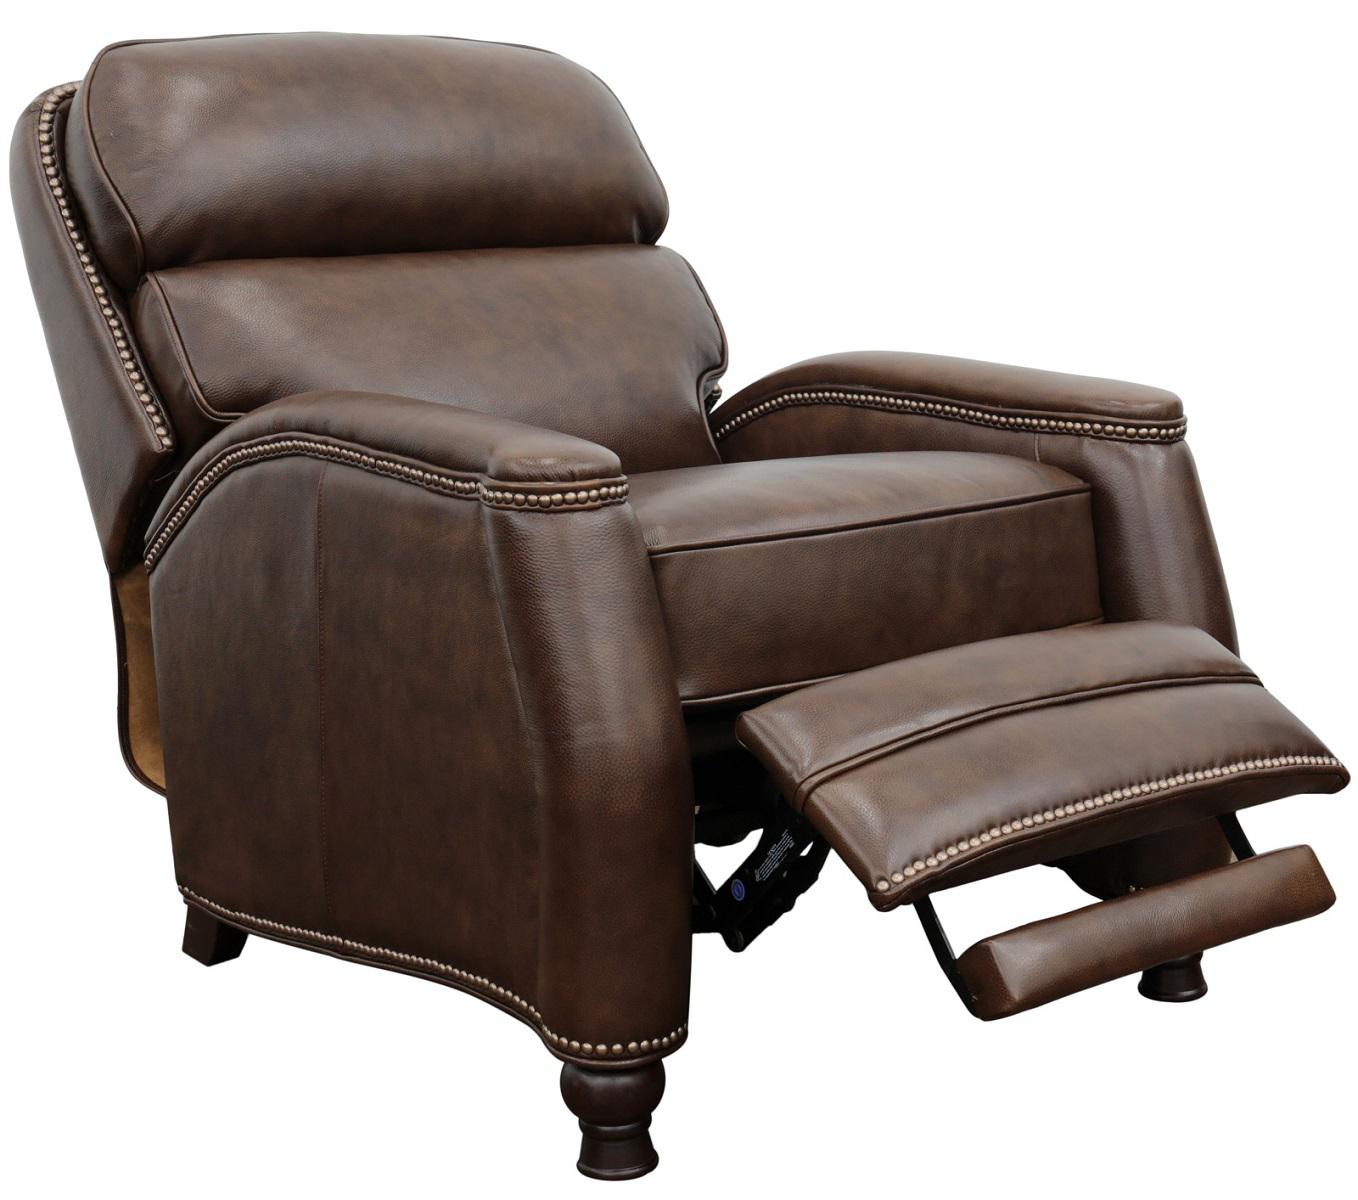 BarcaLounger Townsend Recliner in Wenlock-double chocolate